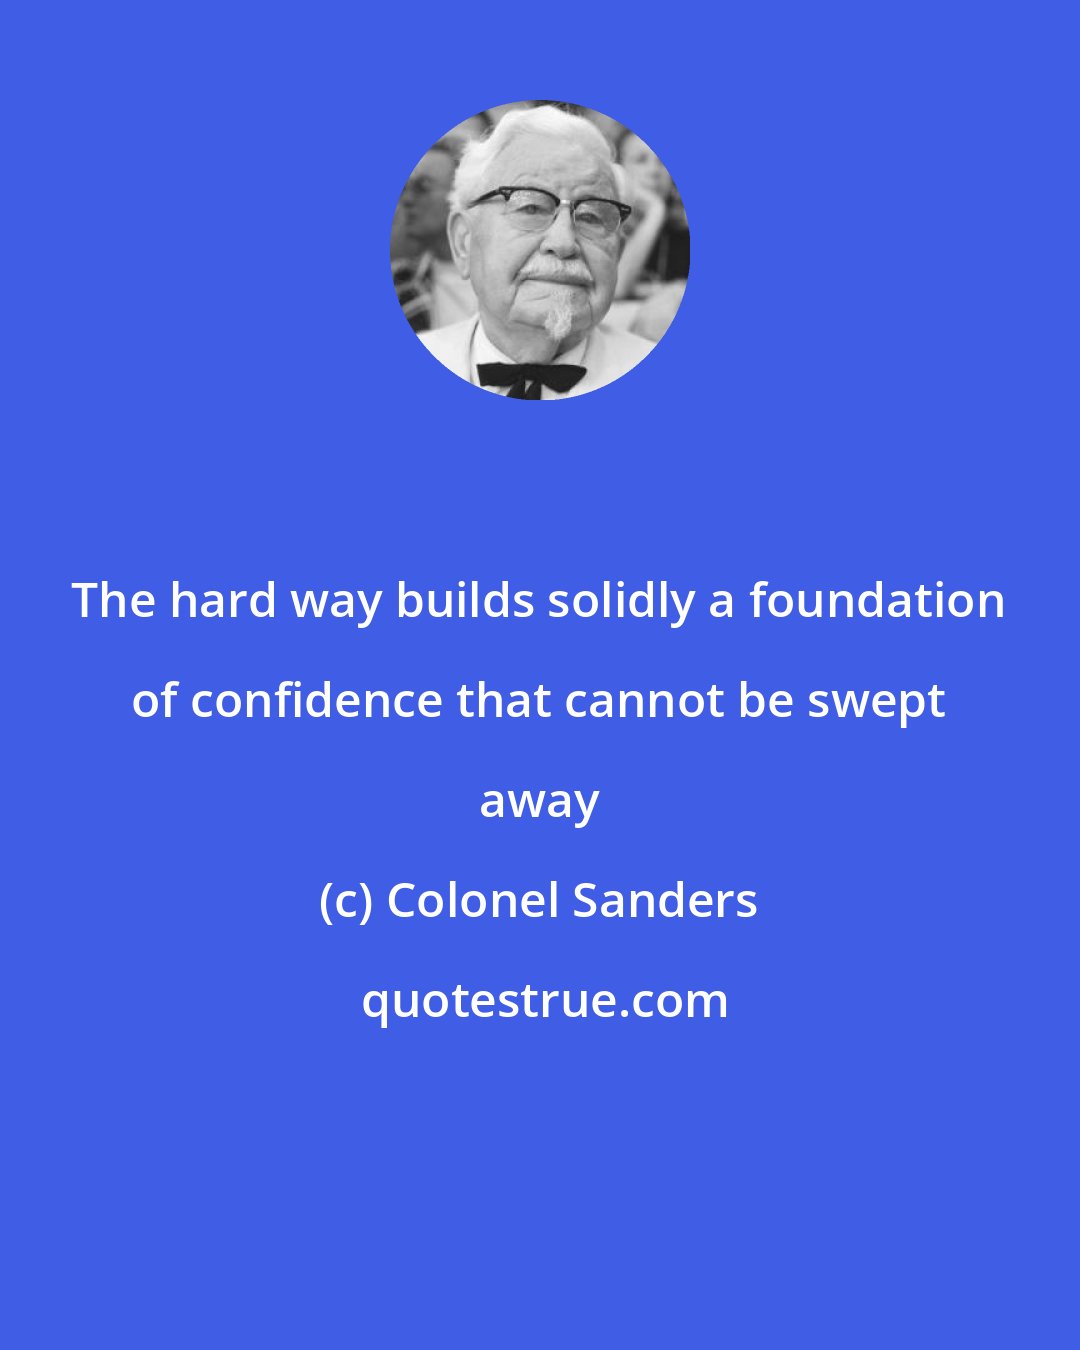 Colonel Sanders: The hard way builds solidly a foundation of confidence that cannot be swept away